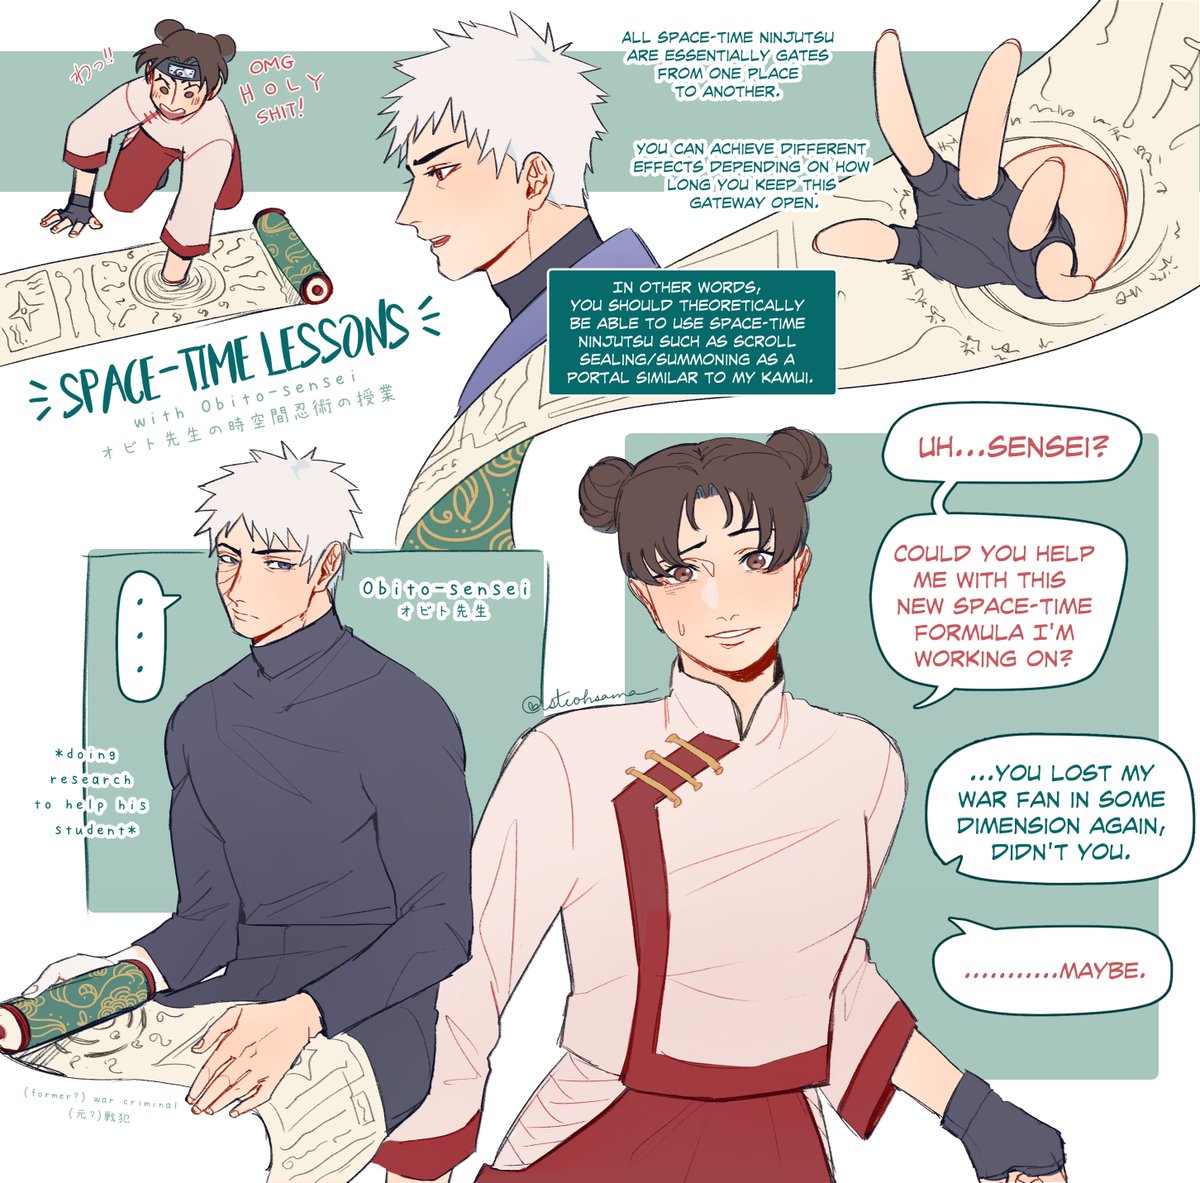 Space-Time Lessons with Obito-sensei! 🌌✨

Tenten's natural affinity for space-time means there are endless possibilities for her to explore. She likes to experiment with the help of Obito, who I imagine is actually quite a thoughtful mentor (despite how grumpy he looks) 